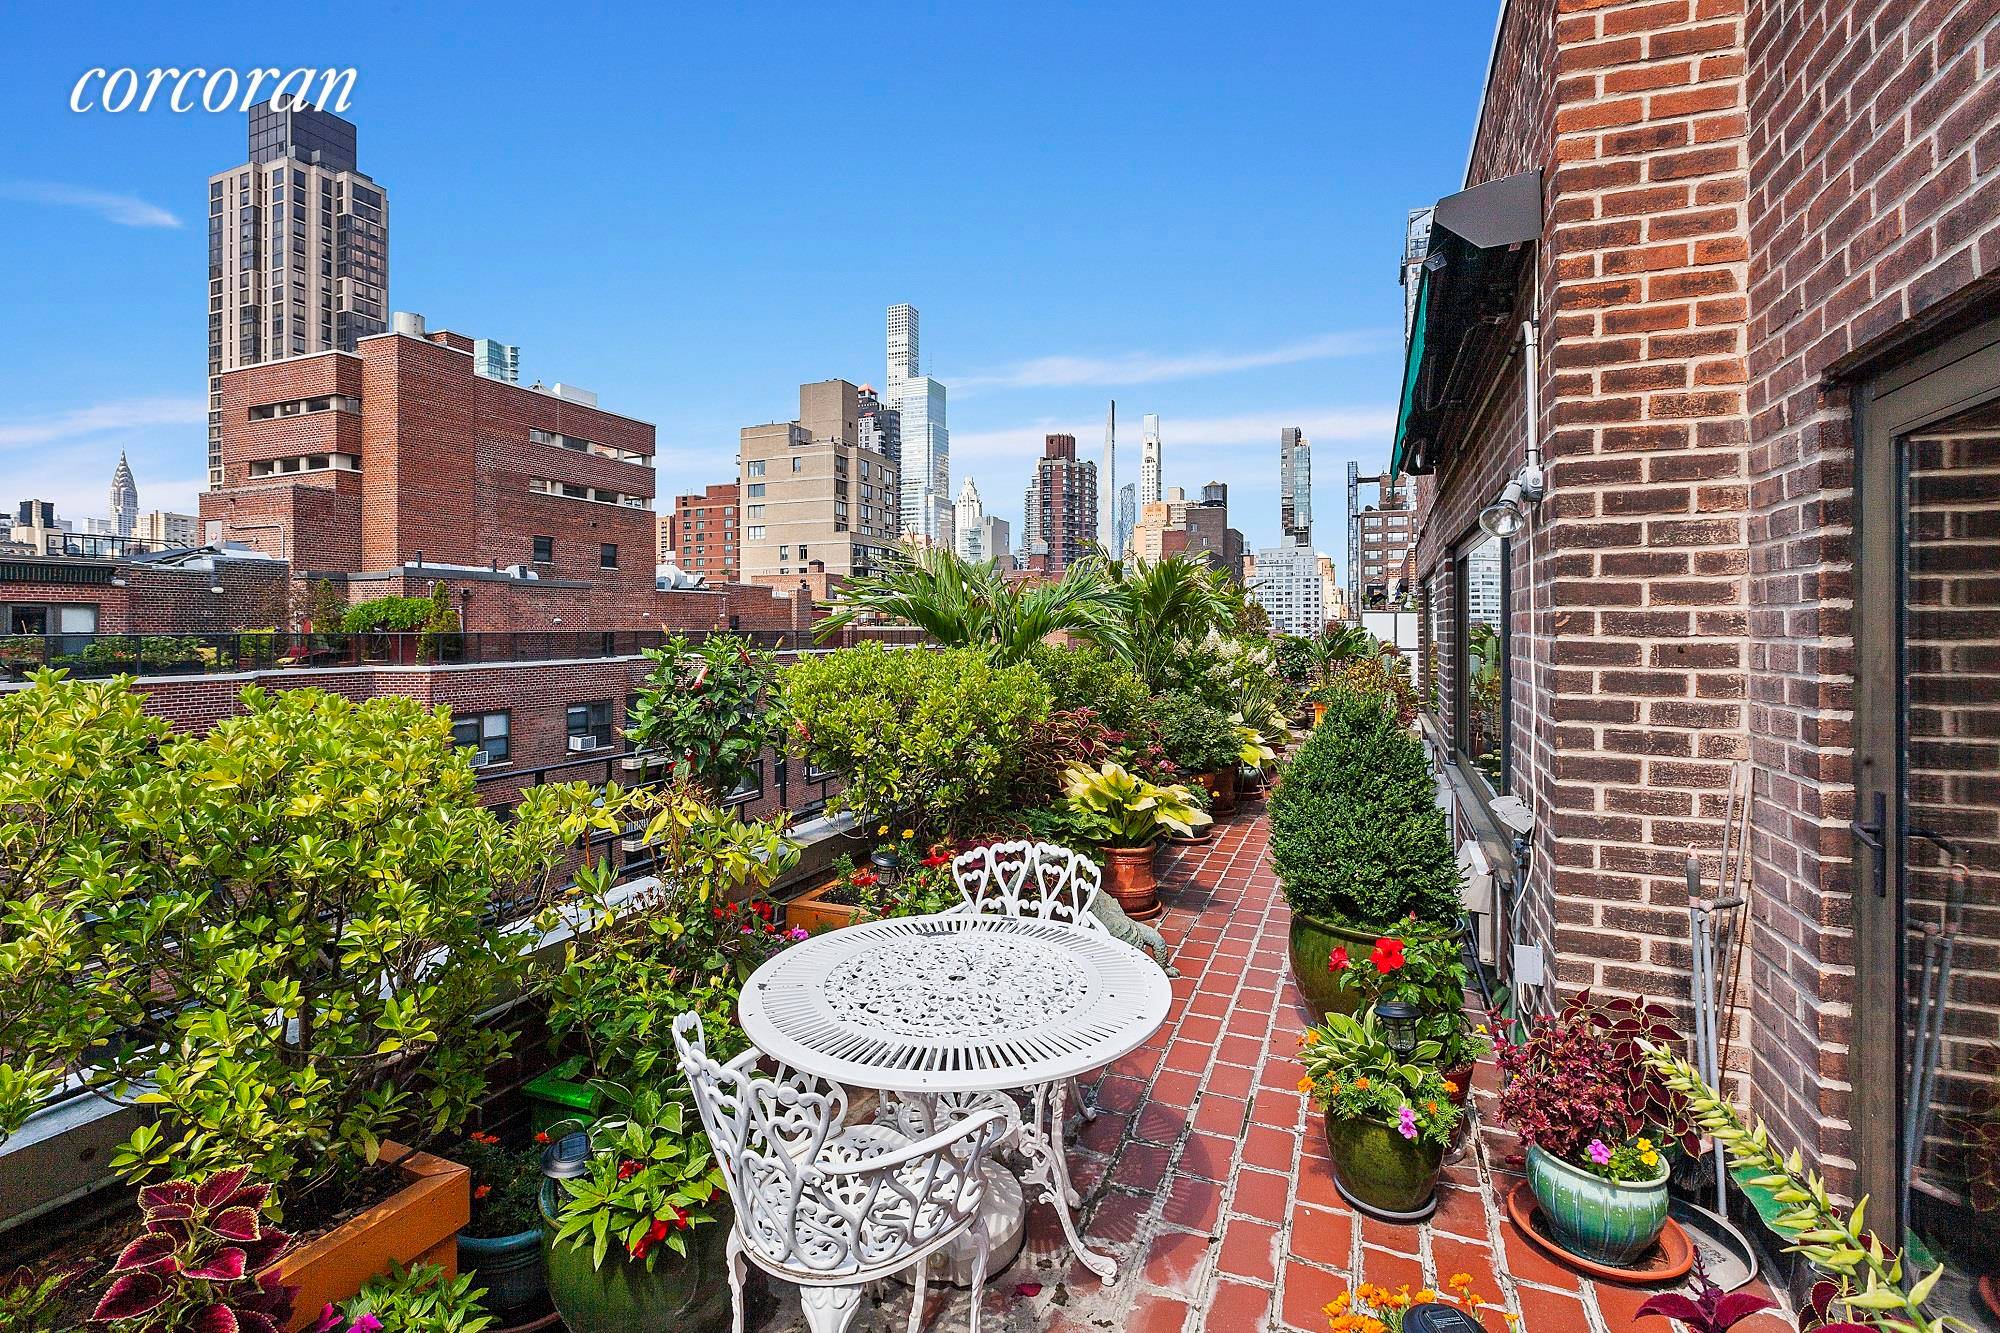 No Board Interview ! 425 East 63rd Street Apt ABCDE is a one of a kind 14 room Full Floor Penthouse with a massive private wrap set back terrace on ...